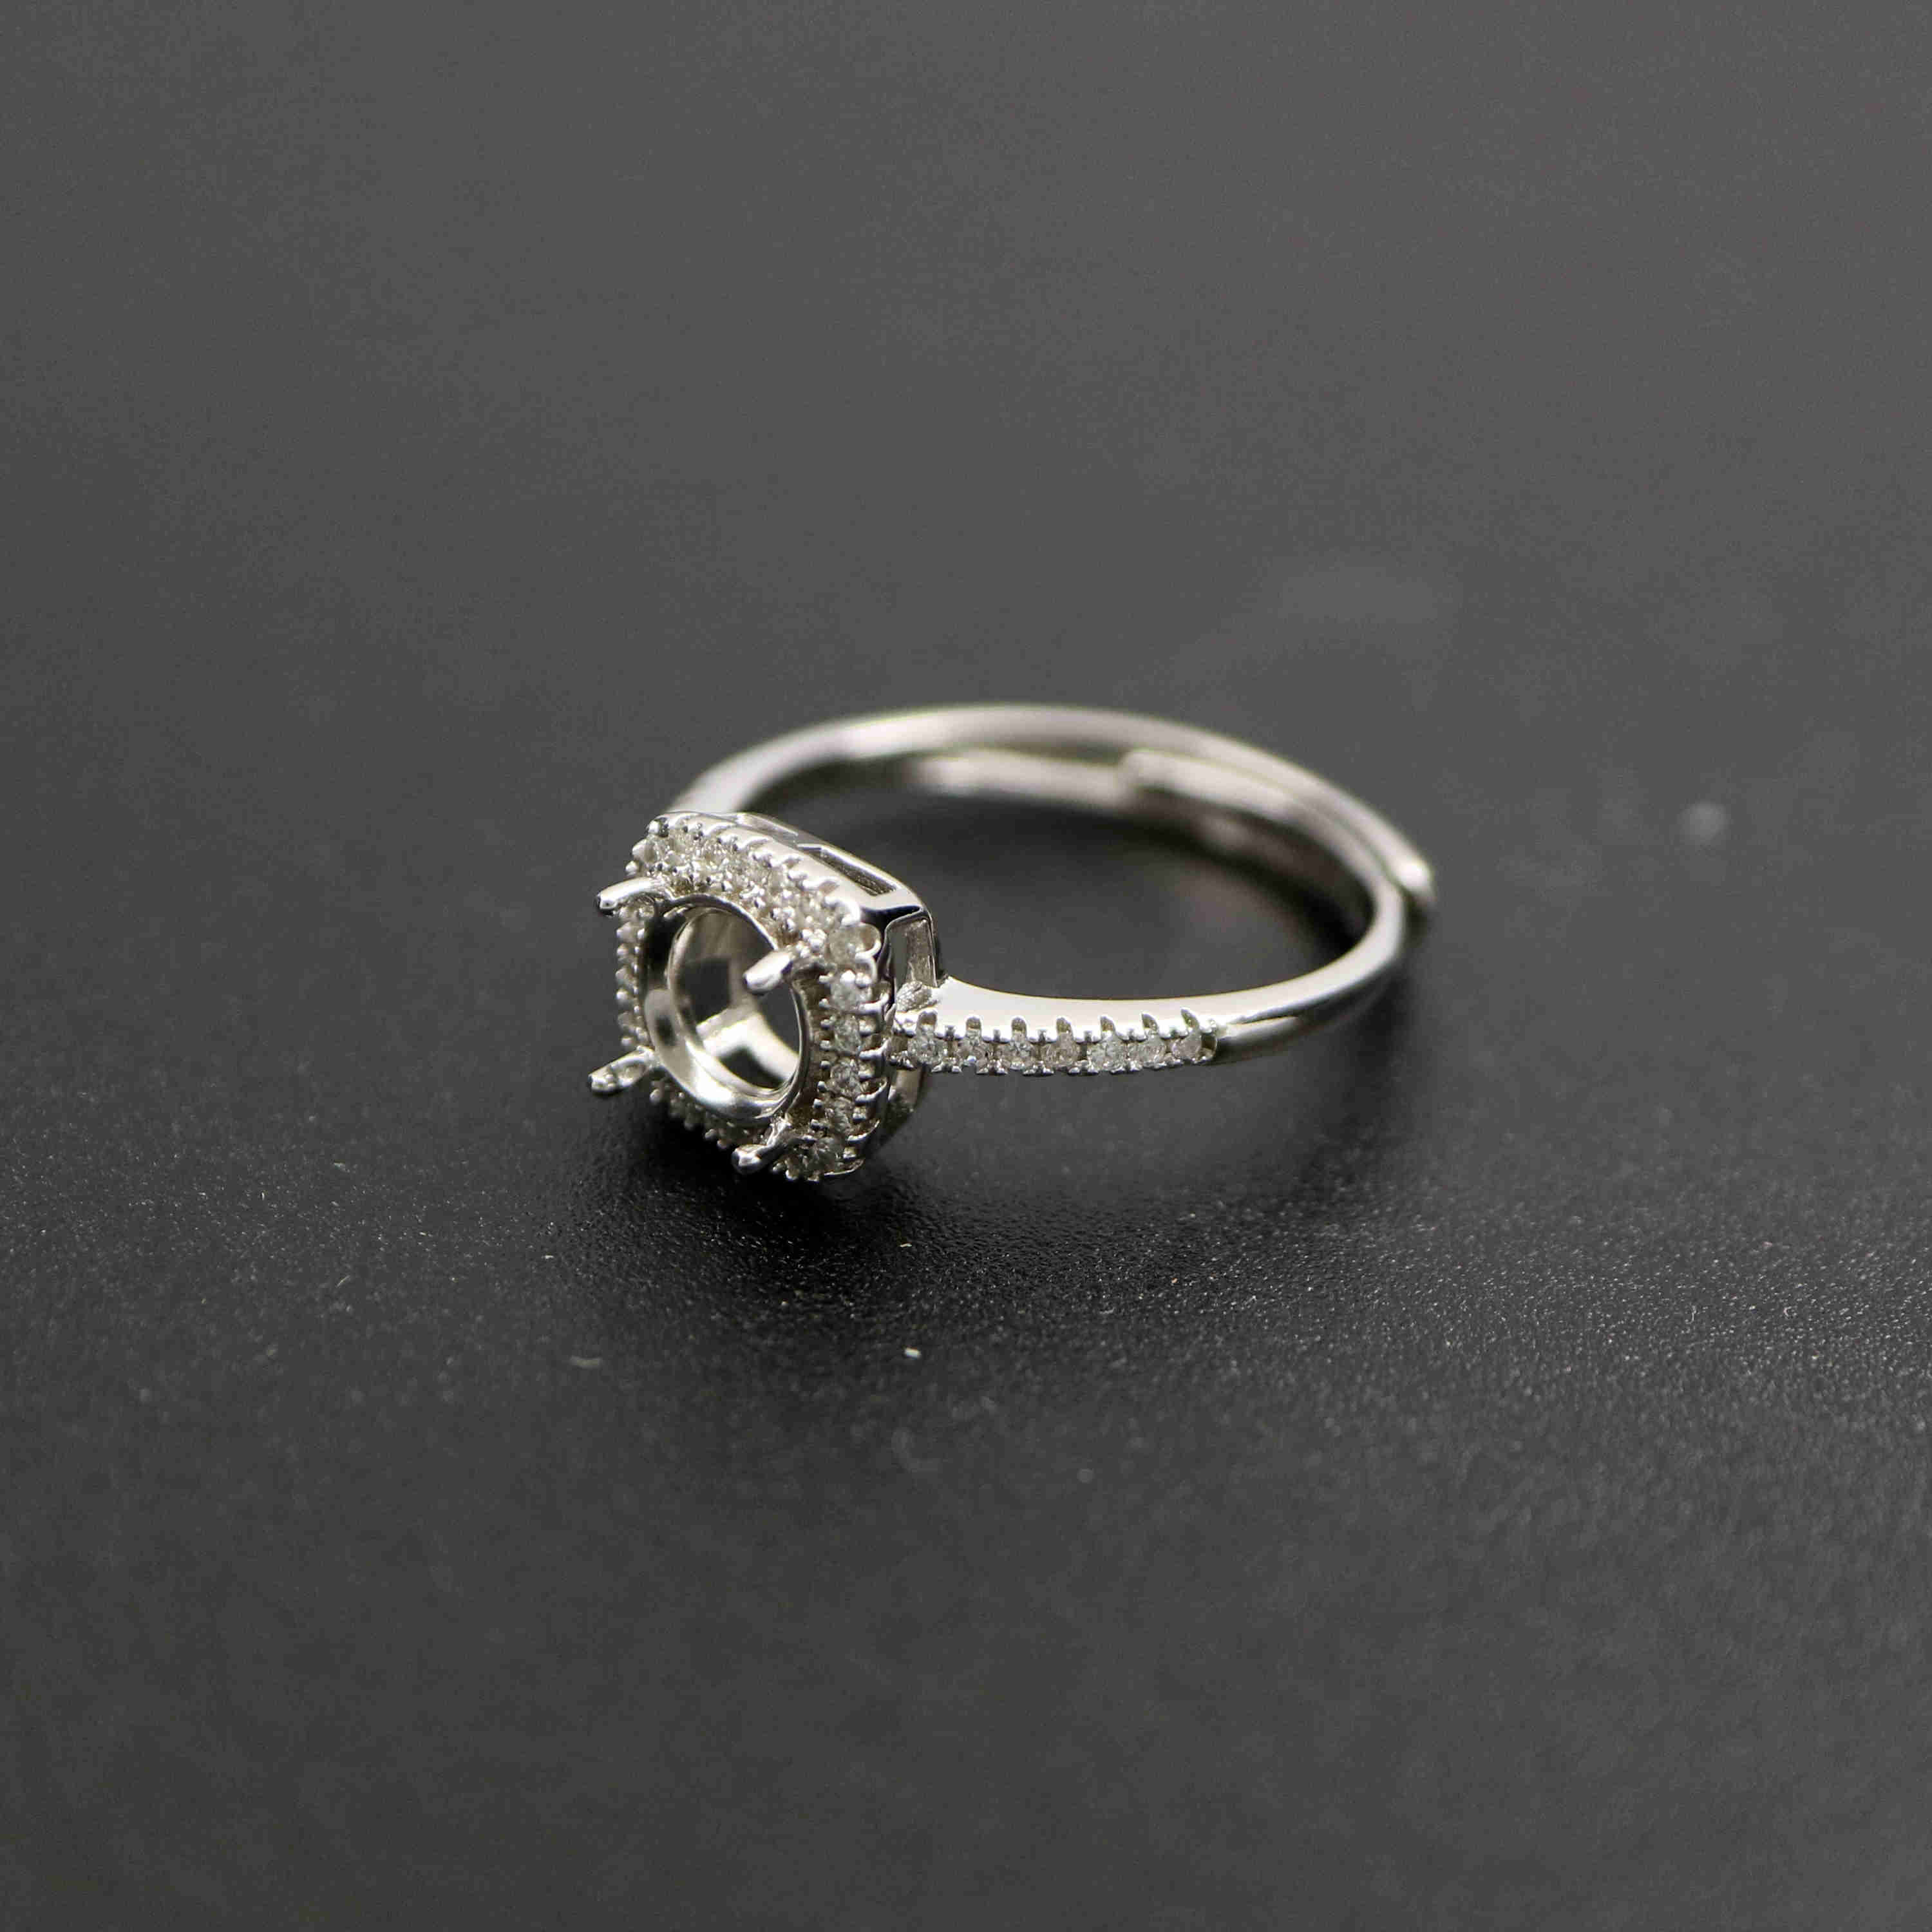 1Pcs 6-8MM Luxury Round Gems Cz Stone Prong Setting Solid 925 Sterling Silver Bezel Tray DIY Adjustable Ring 1214025 - Click Image to Close